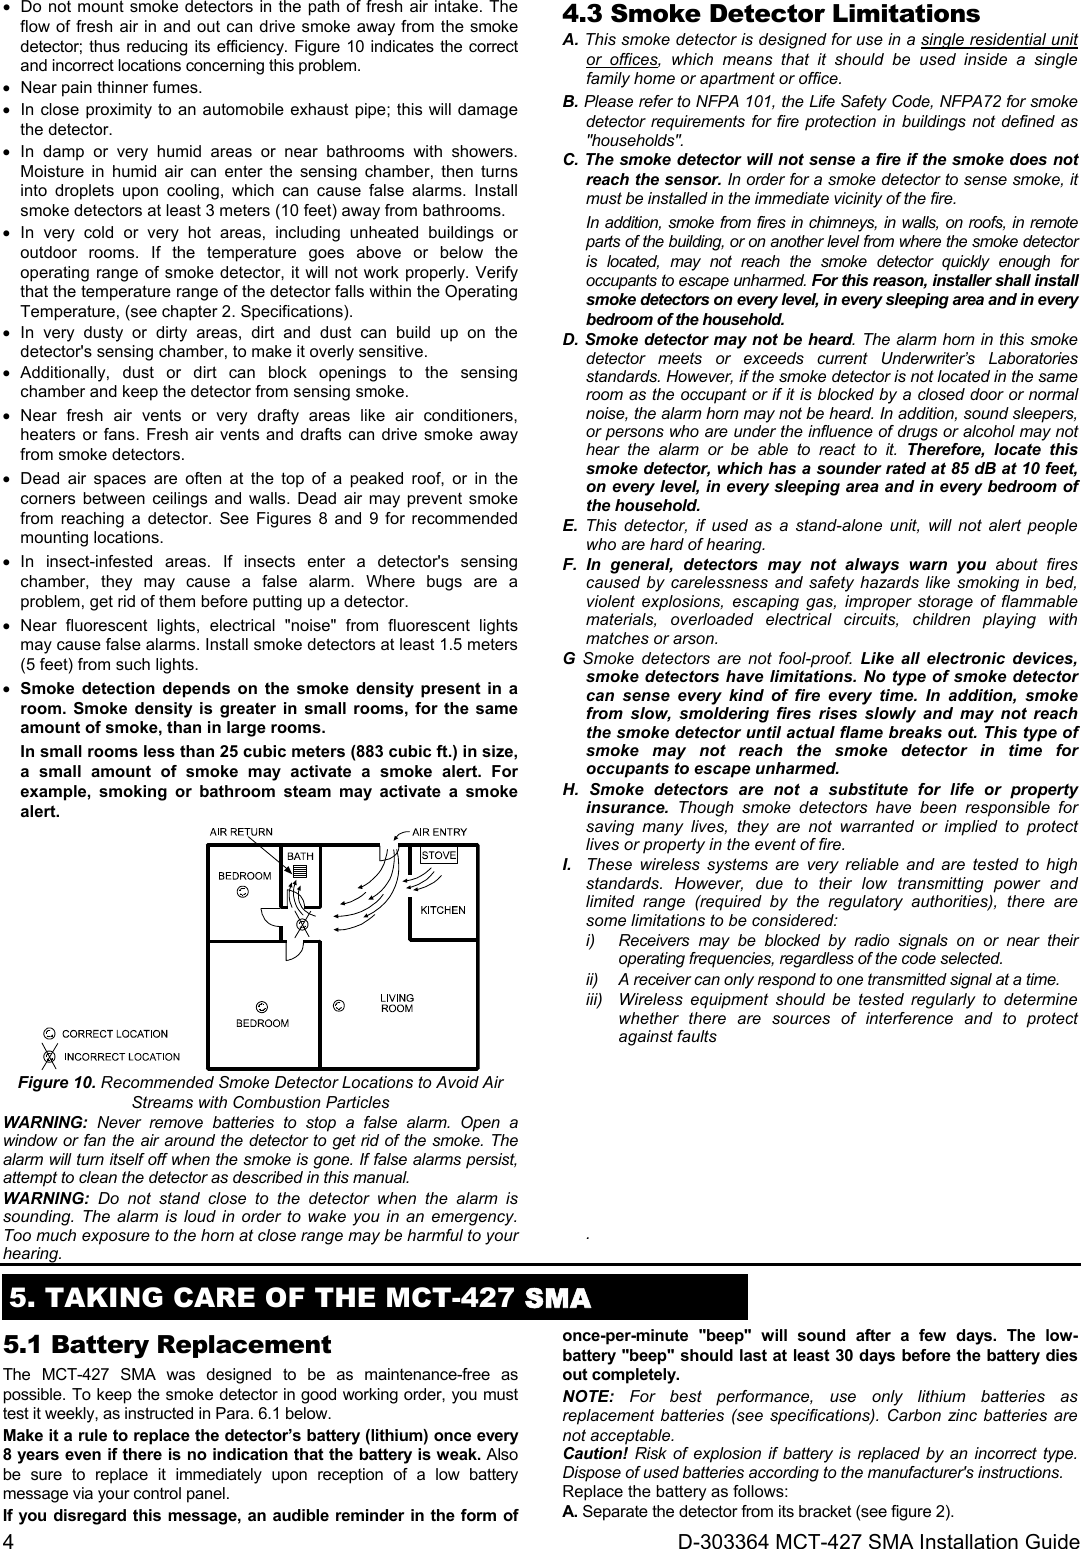 4  D-303364 MCT-427 SMA Installation Guide   Do not mount smoke detectors in the path of fresh air intake. The flow of fresh air in and out can drive smoke away from the smoke detector; thus reducing its efficiency. Figure 10 indicates the correct and incorrect locations concerning this problem.   Near pain thinner fumes.   In close proximity to an automobile exhaust pipe; this will damage the detector.  In damp or very humid areas or near bathrooms with showers. Moisture in humid air can enter the sensing chamber, then turns into droplets upon cooling, which can cause false alarms. Install smoke detectors at least 3 meters (10 feet) away from bathrooms.  In very cold or very hot areas, including unheated buildings or outdoor rooms. If the temperature goes above or below the operating range of smoke detector, it will not work properly. Verify that the temperature range of the detector falls within the Operating Temperature, (see chapter 2. Specifications).  In very dusty or dirty areas, dirt and dust can build up on the detector&apos;s sensing chamber, to make it overly sensitive.   Additionally, dust or dirt can block openings to the sensing chamber and keep the detector from sensing smoke.  Near fresh air vents or very drafty areas like air conditioners, heaters or fans. Fresh air vents and drafts can drive smoke away from smoke detectors.   Dead air spaces are often at the top of a peaked roof, or in the corners between ceilings and walls. Dead air may prevent smoke from reaching a detector. See Figures 8 and 9 for recommended mounting locations.  In insect-infested areas. If insects enter a detector&apos;s sensing chamber, they may cause a false alarm. Where bugs are a problem, get rid of them before putting up a detector.  Near fluorescent lights, electrical &quot;noise&quot; from fluorescent lights may cause false alarms. Install smoke detectors at least 1.5 meters (5 feet) from such lights.  Smoke detection depends on the smoke density present in a room. Smoke density is greater in small rooms, for the same amount of smoke, than in large rooms. In small rooms less than 25 cubic meters (883 cubic ft.) in size, a small amount of smoke may activate a smoke alert. For example, smoking or bathroom steam may activate a smoke alert.  Figure 10. Recommended Smoke Detector Locations to Avoid Air Streams with Combustion Particles WARNING: Never remove batteries to stop a false alarm. Open a window or fan the air around the detector to get rid of the smoke. The alarm will turn itself off when the smoke is gone. If false alarms persist, attempt to clean the detector as described in this manual.  WARNING: Do not stand close to the detector when the alarm is sounding. The alarm is loud in order to wake you in an emergency. Too much exposure to the horn at close range may be harmful to your hearing. 4.3 Smoke Detector Limitations A. This smoke detector is designed for use in a single residential unit or offices, which means that it should be used inside a single family home or apartment or office. B. Please refer to NFPA 101, the Life Safety Code, NFPA72 for smoke detector requirements for fire protection in buildings not defined as &quot;households&quot;. C. The smoke detector will not sense a fire if the smoke does not reach the sensor. In order for a smoke detector to sense smoke, it must be installed in the immediate vicinity of the fire.  In addition, smoke from fires in chimneys, in walls, on roofs, in remote parts of the building, or on another level from where the smoke detector is located, may not reach the smoke detector quickly enough for occupants to escape unharmed. For this reason, installer shall install smoke detectors on every level, in every sleeping area and in every bedroom of the household. D. Smoke detector may not be heard. The alarm horn in this smoke detector meets or exceeds current Underwriter’s Laboratories standards. However, if the smoke detector is not located in the same room as the occupant or if it is blocked by a closed door or normal noise, the alarm horn may not be heard. In addition, sound sleepers, or persons who are under the influence of drugs or alcohol may not hear the alarm or be able to react to it. Therefore, locate this smoke detector, which has a sounder rated at 85 dB at 10 feet, on every level, in every sleeping area and in every bedroom of the household. E. This detector, if used as a stand-alone unit, will not alert people who are hard of hearing. F.  In general, detectors may not always warn you about fires caused by carelessness and safety hazards like smoking in bed, violent explosions, escaping gas, improper storage of flammable materials, overloaded electrical circuits, children playing with matches or arson. G Smoke detectors are not fool-proof. Like all electronic devices, smoke detectors have limitations. No type of smoke detector can sense every kind of fire every time. In addition, smoke from slow, smoldering fires rises slowly and may not reach the smoke detector until actual flame breaks out. This type of smoke may not reach the smoke detector in time for occupants to escape unharmed. H. Smoke detectors are not a substitute for life or property insurance.  Though smoke detectors have been responsible for saving many lives, they are not warranted or implied to protect lives or property in the event of fire. I.   These wireless systems are very reliable and are tested to high standards. However, due to their low transmitting power and limited range (required by the regulatory authorities), there are some limitations to be considered: i)  Receivers may be blocked by radio signals on or near their operating frequencies, regardless of the code selected. ii)   A receiver can only respond to one transmitted signal at a time. iii)   Wireless equipment should be tested regularly to determine whether there are sources of interference and to protect against faults        .  5. TAKING CARE OF THE MCT-427 SMA 5.1 Battery Replacement The MCT-427 SMA was designed to be as maintenance-free as possible. To keep the smoke detector in good working order, you must test it weekly, as instructed in Para. 6.1 below.  Make it a rule to replace the detector’s battery (lithium) once every 8 years even if there is no indication that the battery is weak. Also be sure to replace it immediately upon reception of a low battery message via your control panel. If you disregard this message, an audible reminder in the form of once-per-minute &quot;beep&quot; will sound after a few days. The low-battery &quot;beep&quot; should last at least 30 days before the battery dies out completely. NOTE: For best performance, use only lithium batteries as replacement batteries (see specifications). Carbon zinc batteries are not acceptable. Caution! Risk of explosion if battery is replaced by an incorrect type. Dispose of used batteries according to the manufacturer&apos;s instructions. Replace the battery as follows: A. Separate the detector from its bracket (see figure 2). 